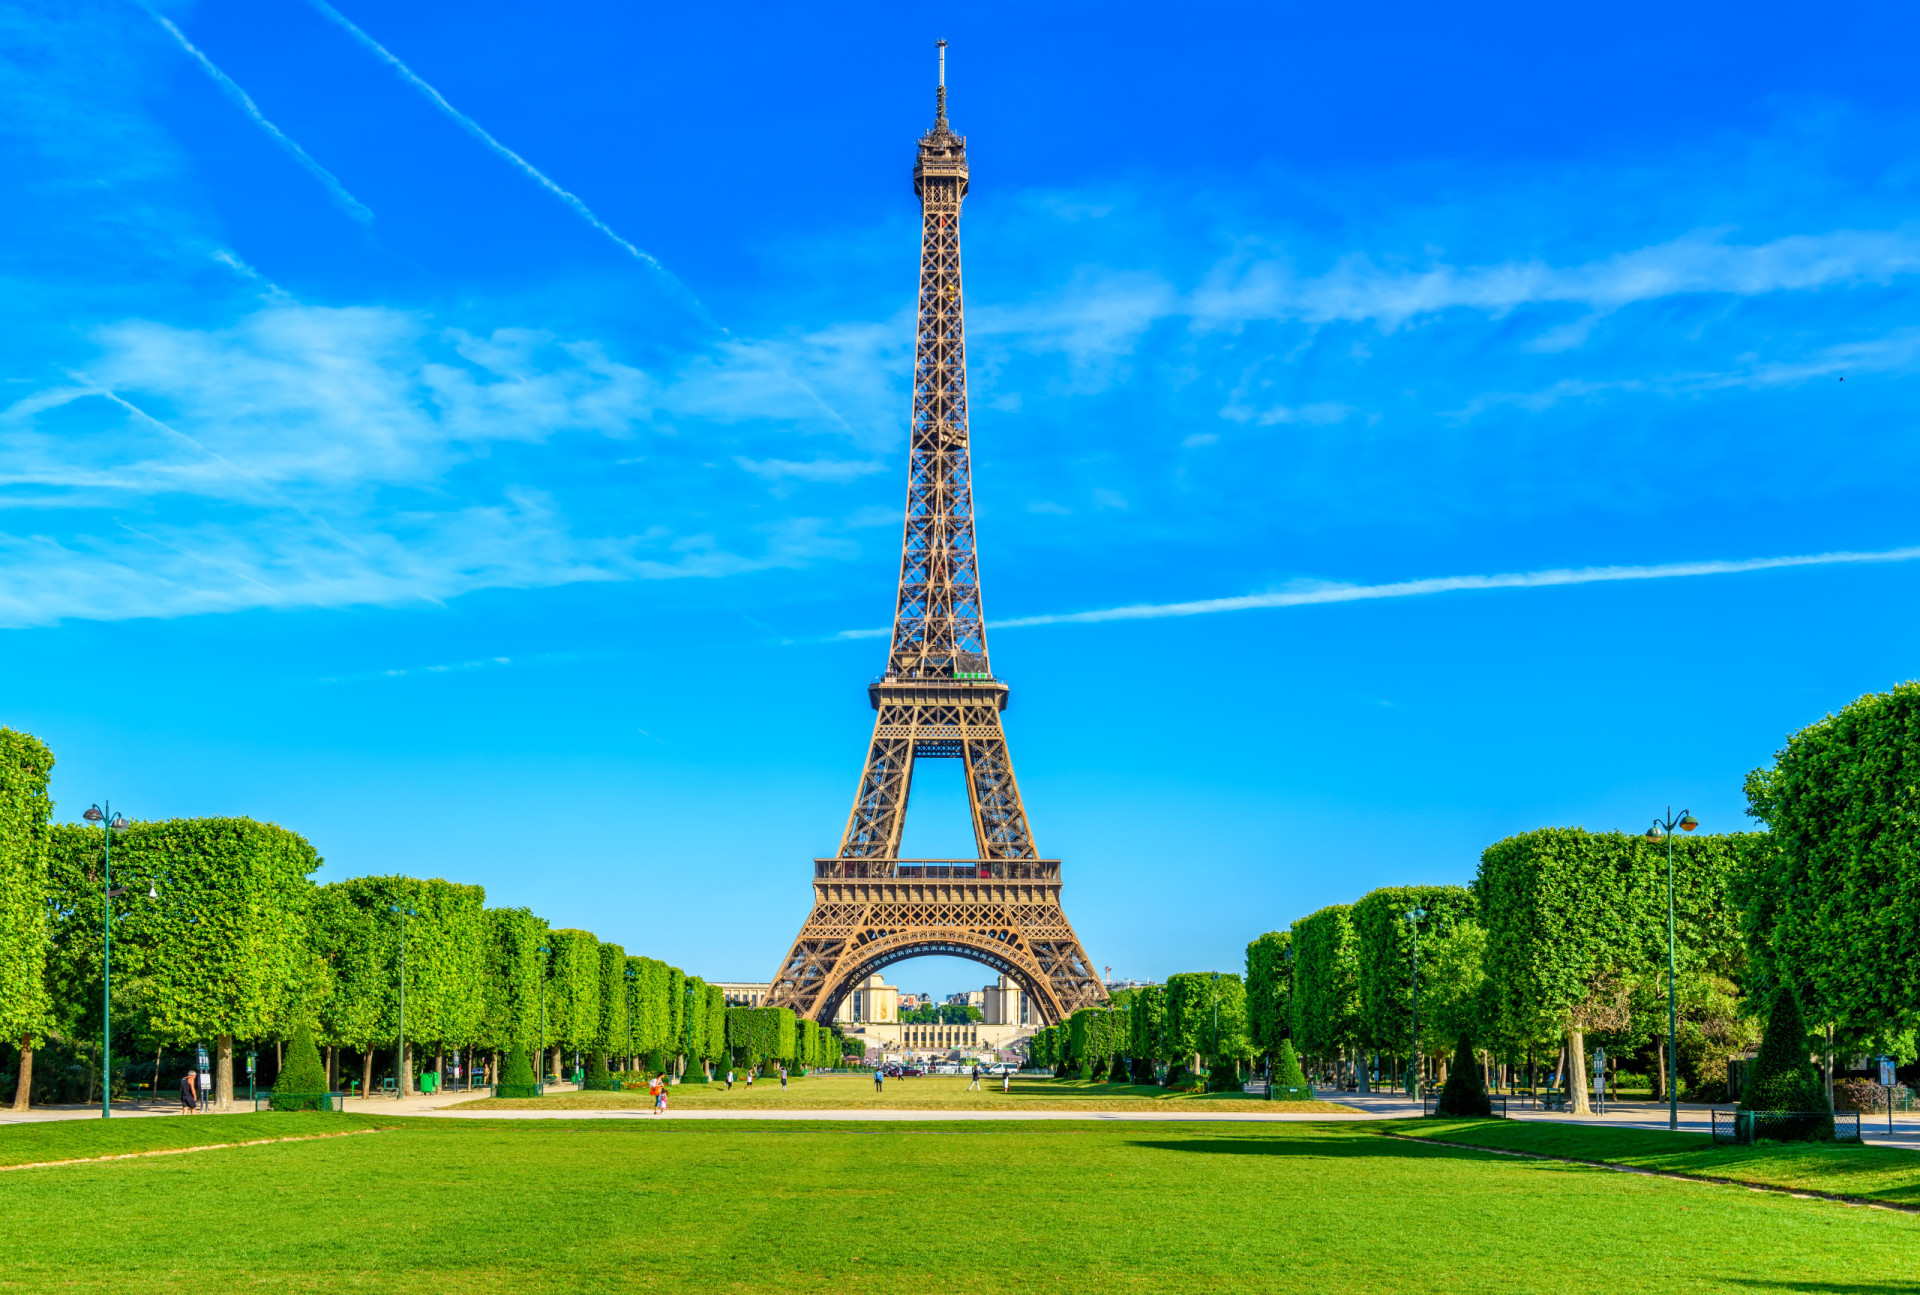 <p>The truth is that you won't be alone near the Eiffel Tower. So don't expect to get a picture without any tourists behind you.</p><p><a href="https://www.msn.com/en-us/community/channel/vid-7xx8mnucu55yw63we9va2gwr7uihbxwc68fxqp25x6tg4ftibpra?cvid=94631541bc0f4f89bfd59158d696ad7e">Follow us and access great exclusive content every day</a></p>